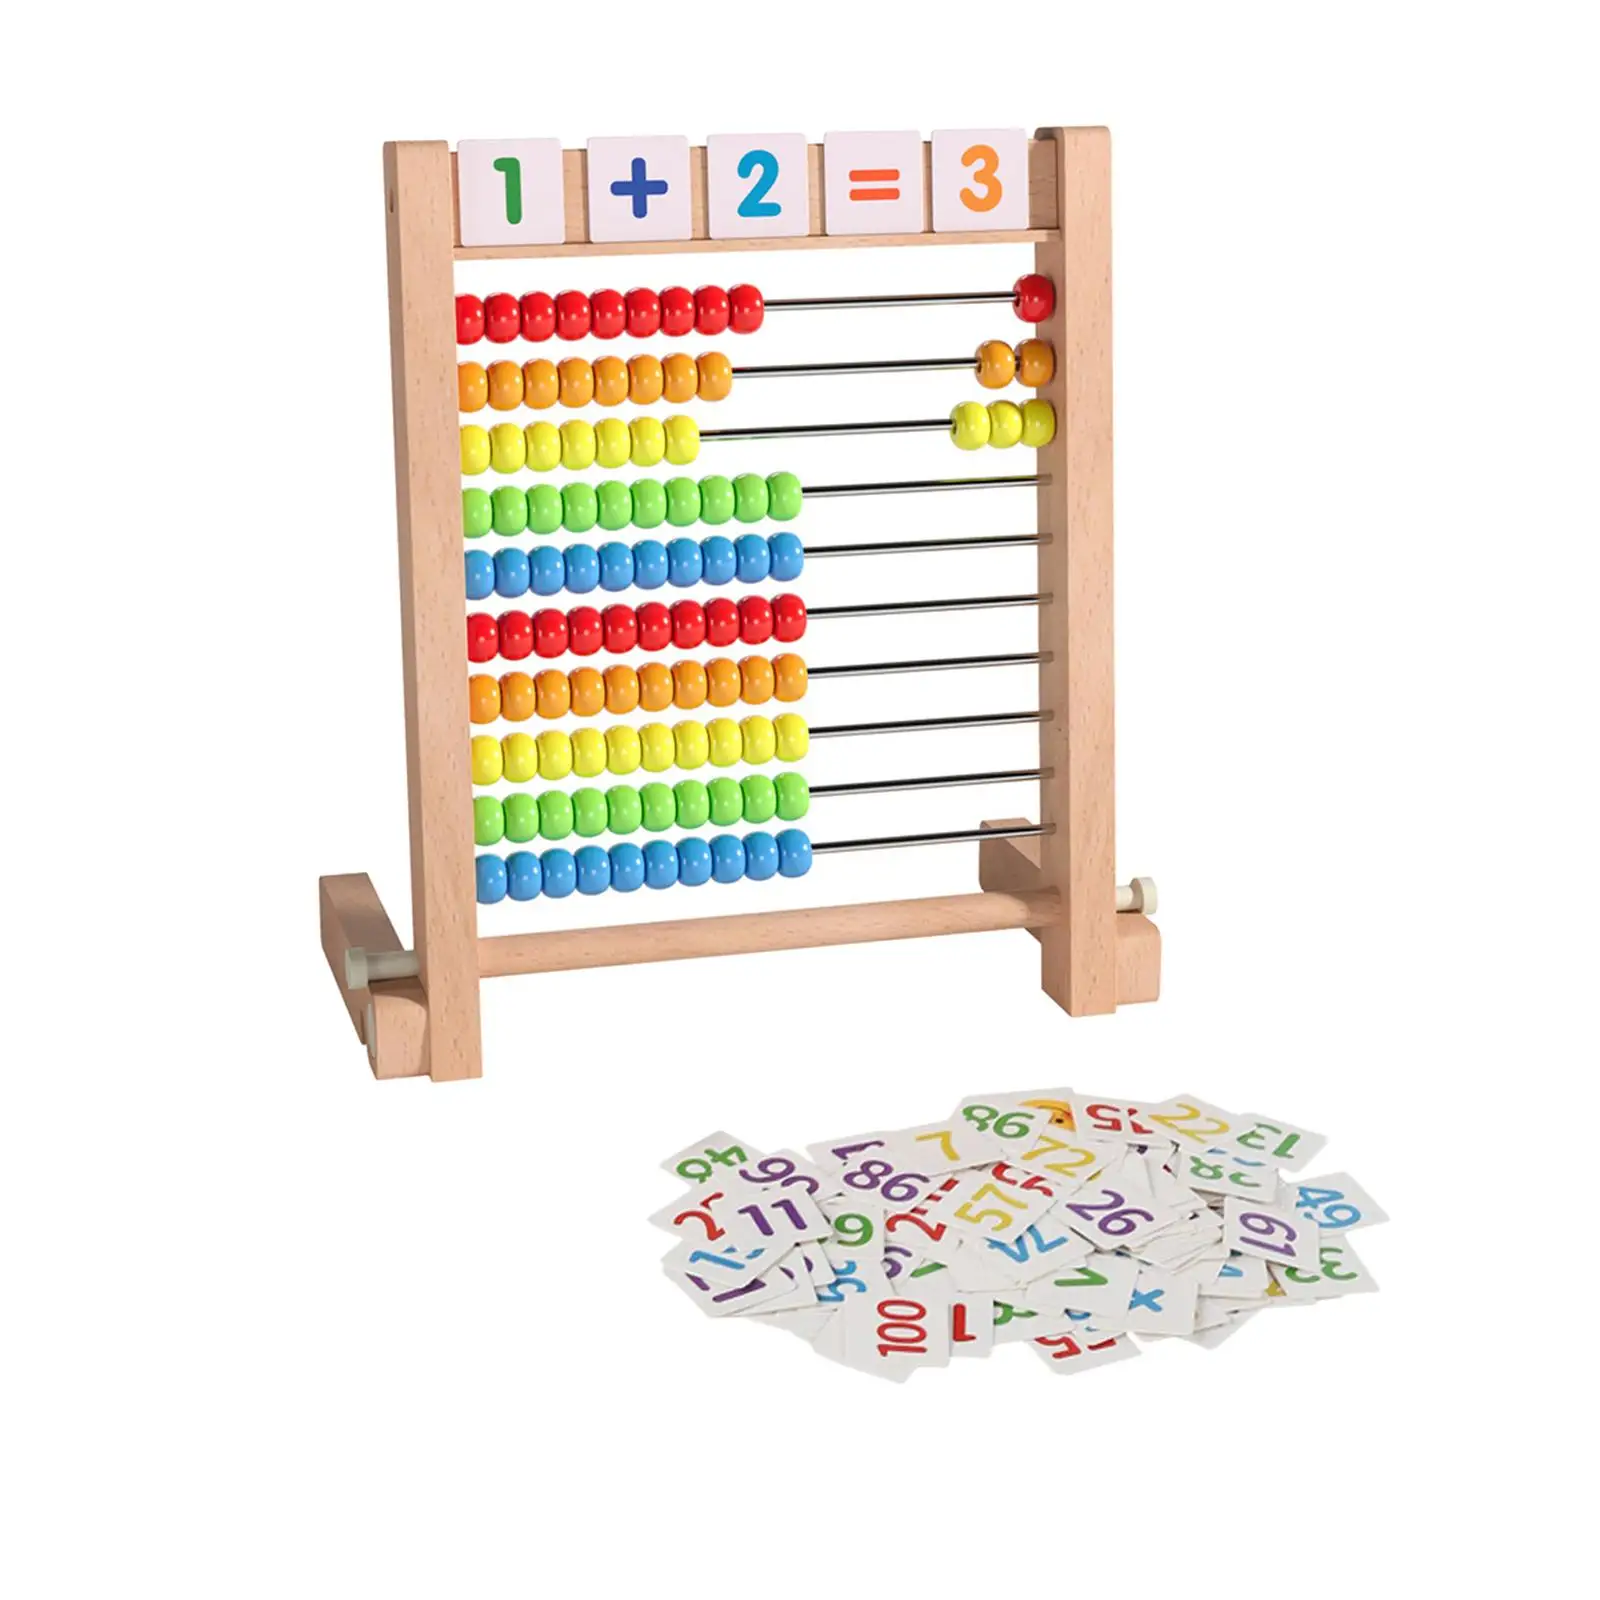 Wooden Abacus Math Manipulatives Ten Frame Set Smooth Edges Montessori Educational Counting Toy for Children Kids Toddlers